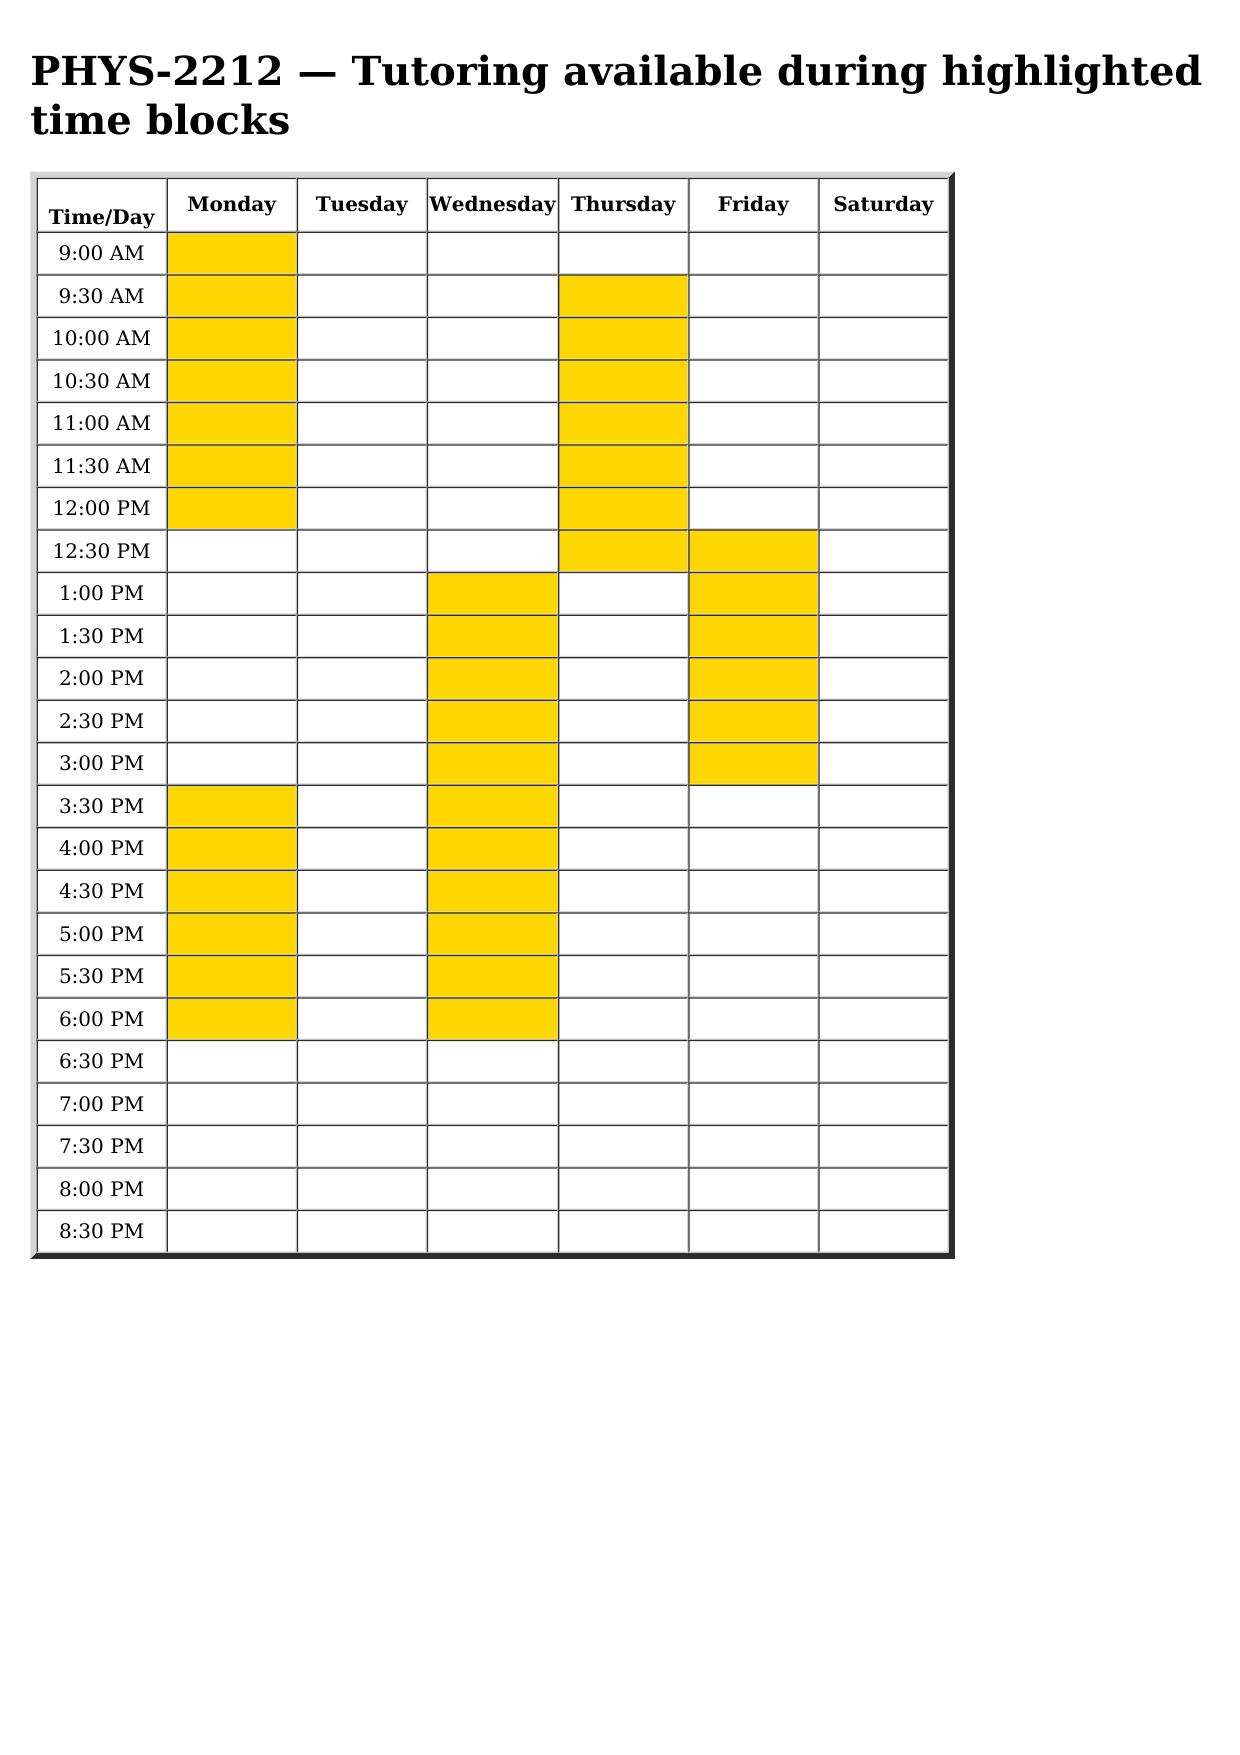 PHYS 2212 SCHEDULE